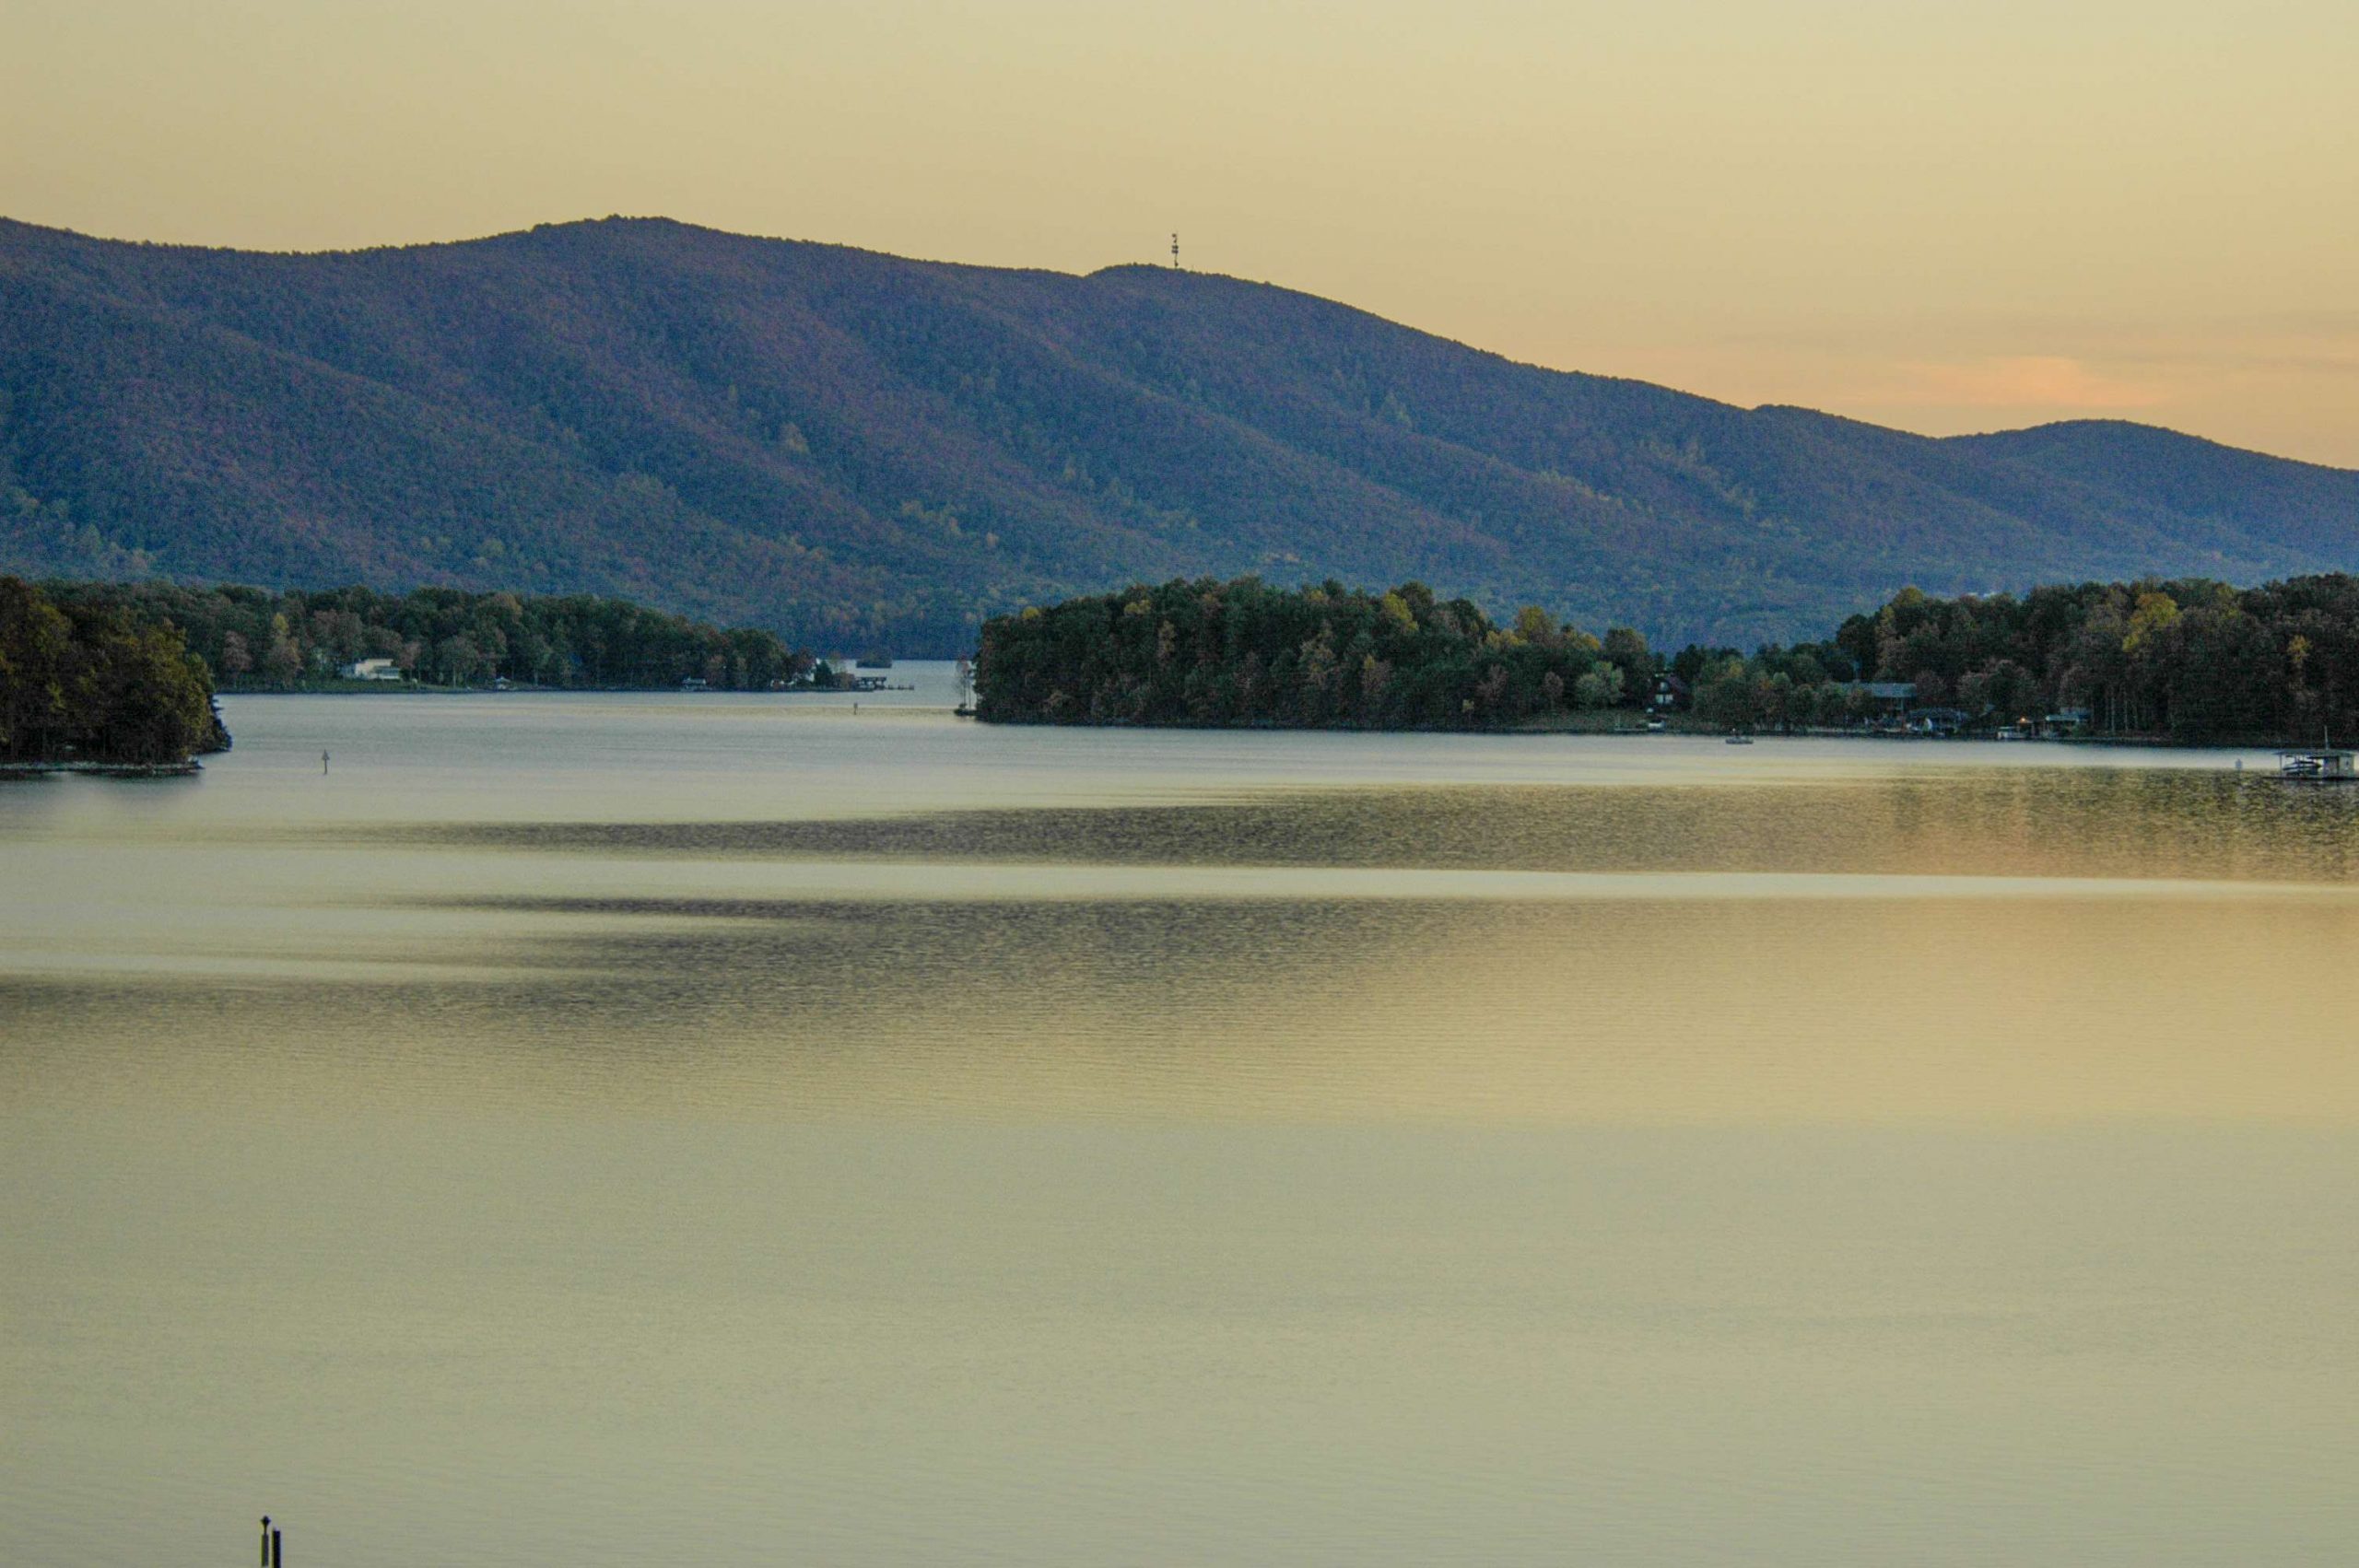 Smith Mountain Lake has a surface area of 32 square miles and is in the Roanoke region of Virginia. 